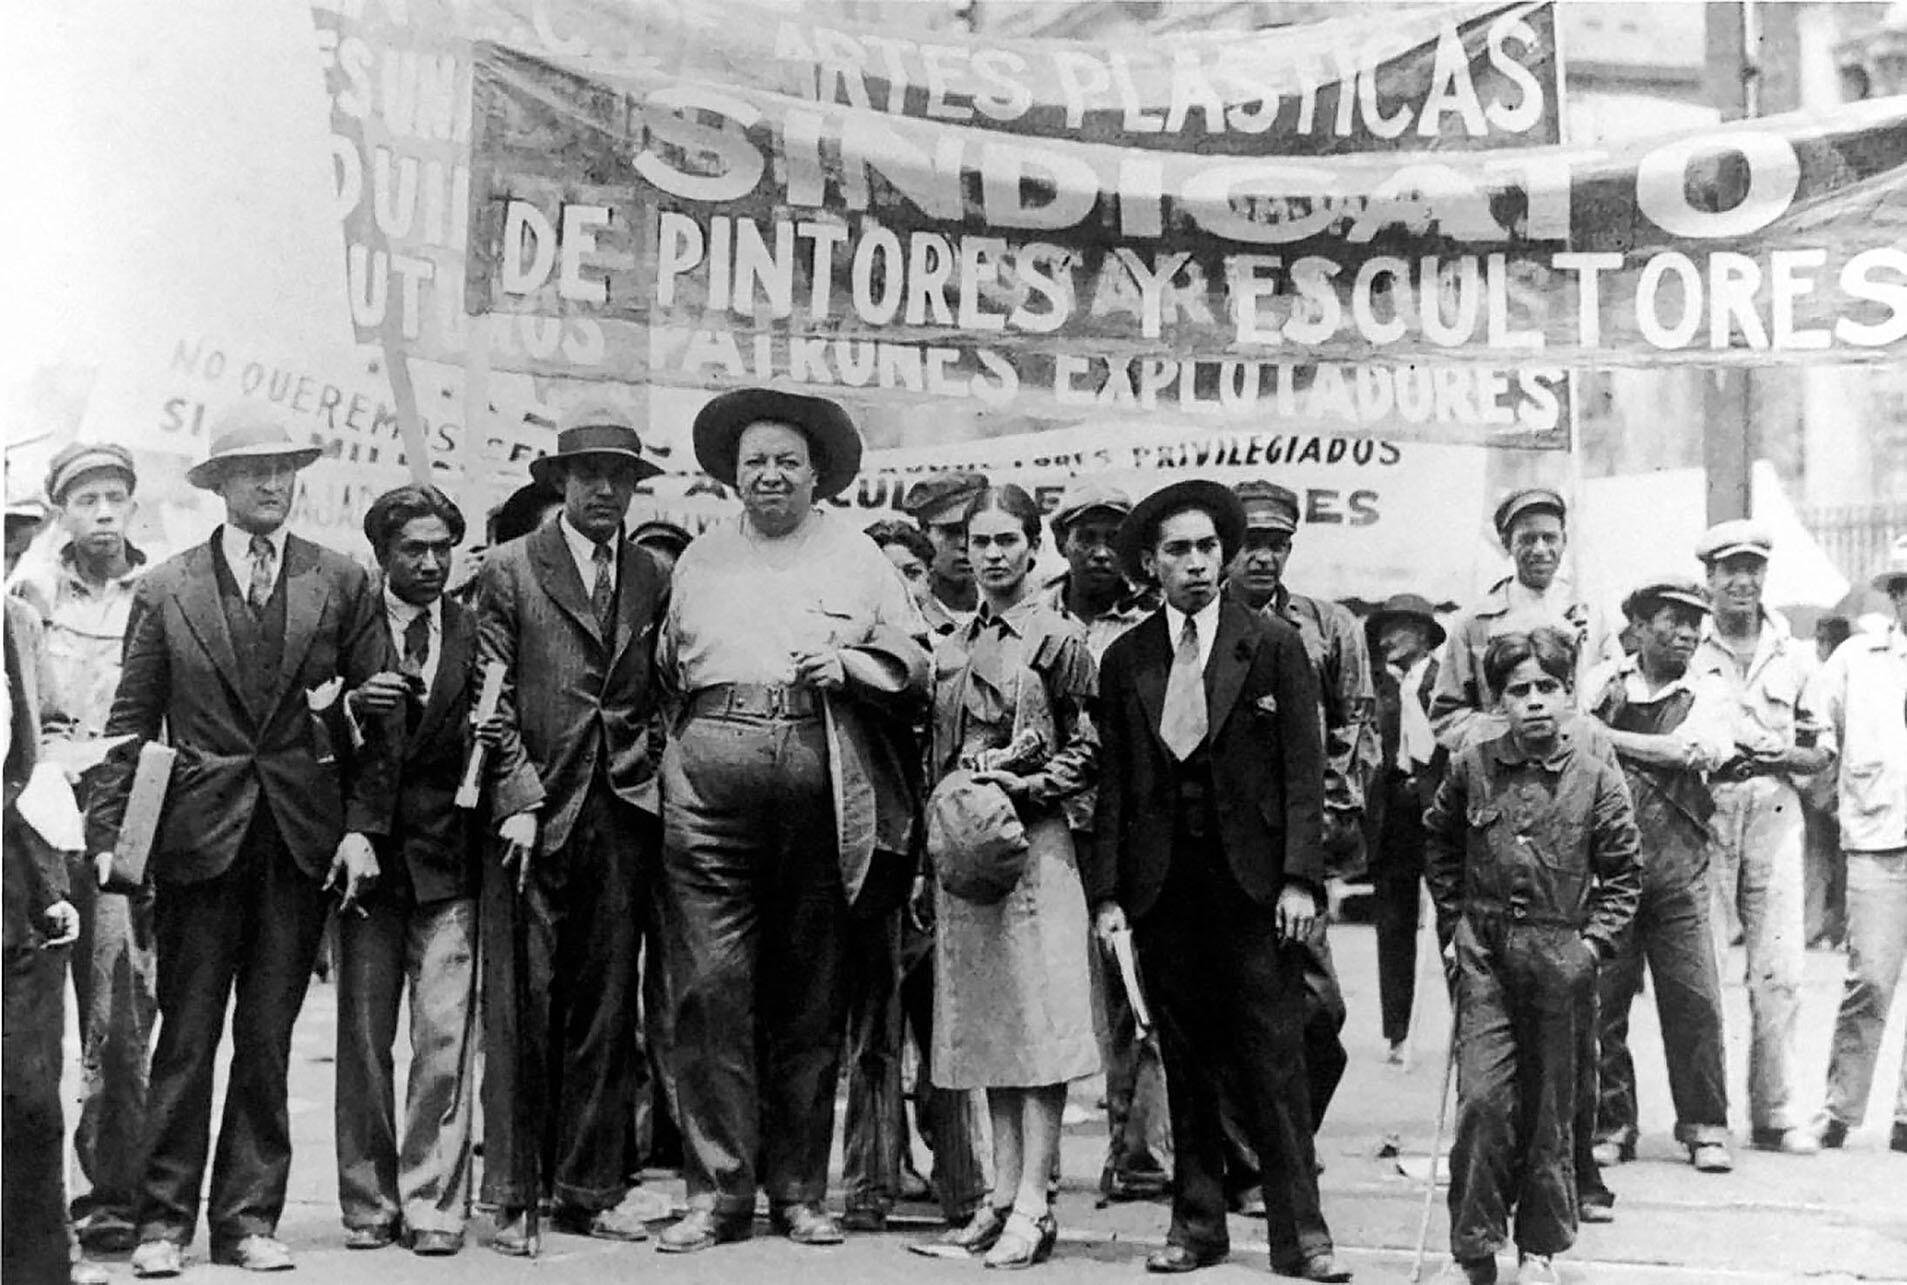 Diego Rivera and Frida Kahlo with members of the Artists’ Union at a May Day march in Mexico City, 1929. (Photo by Tina Modotti.)